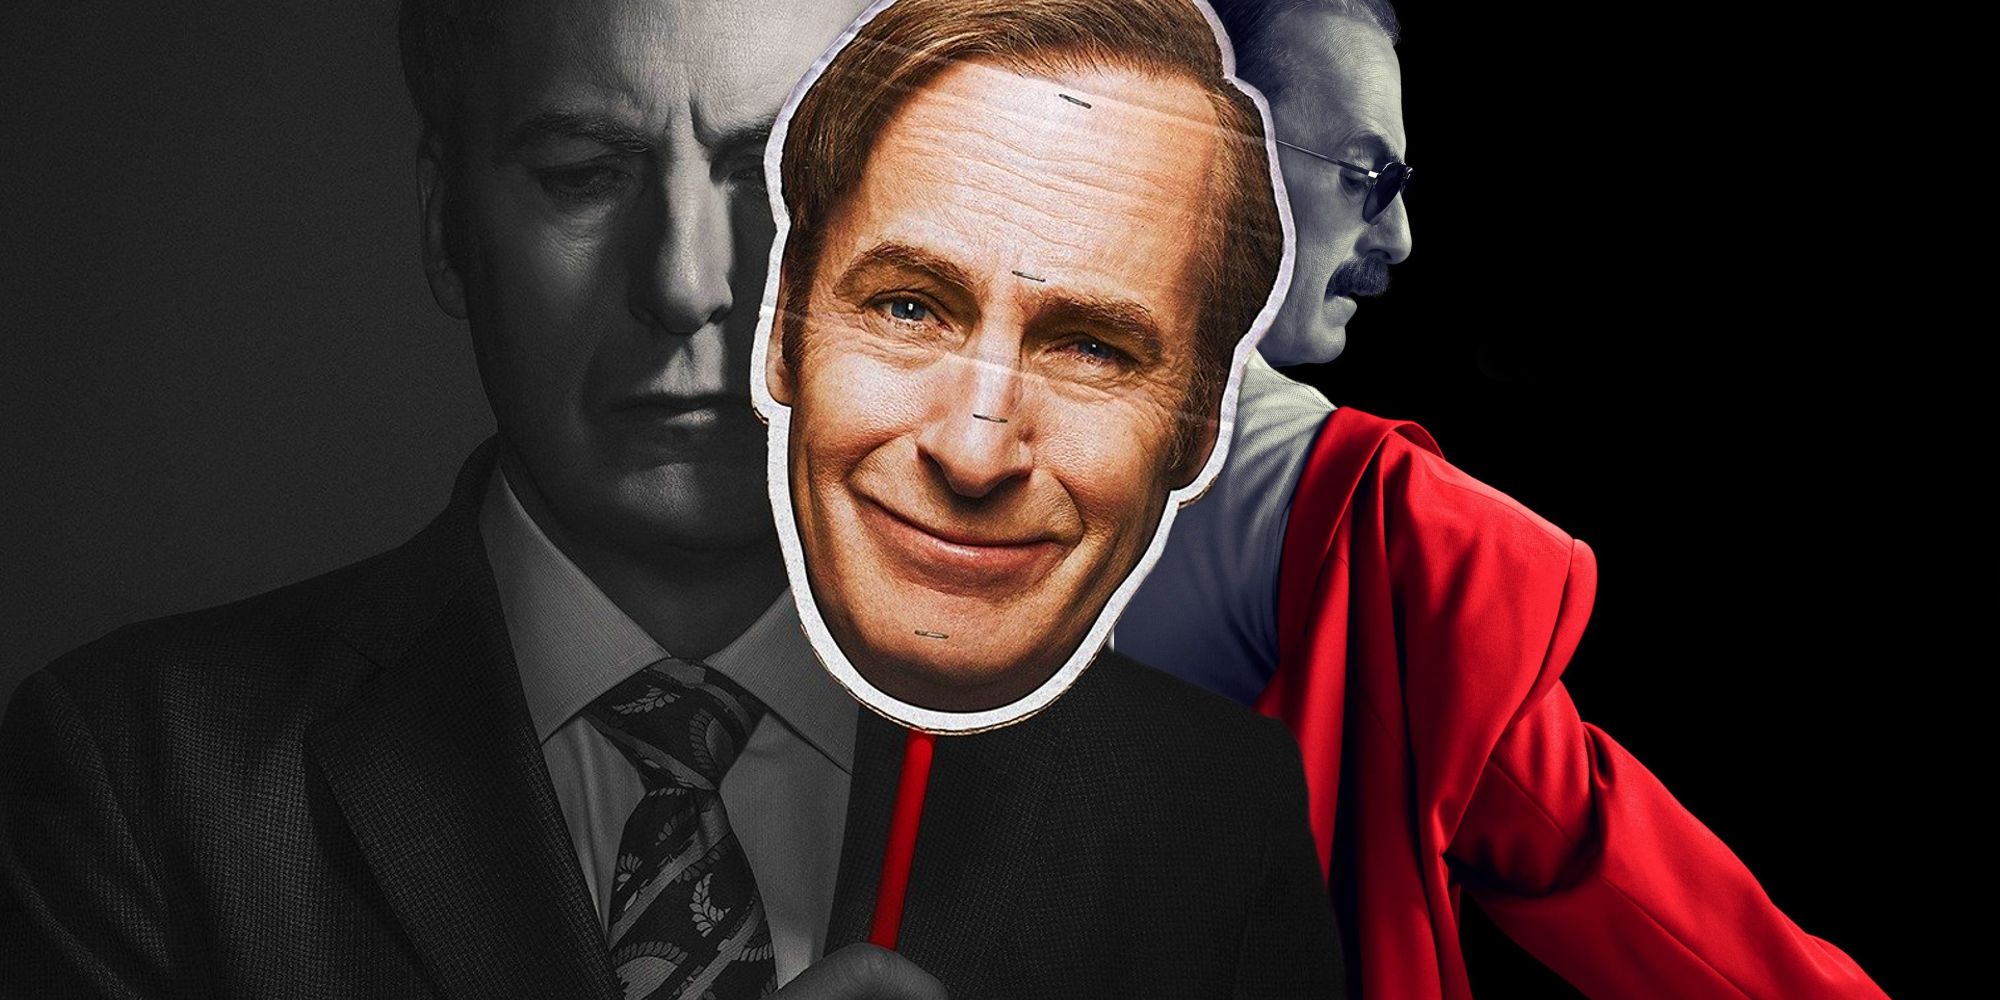 BETTER CALL SAUL THE COMPLETE SERIES